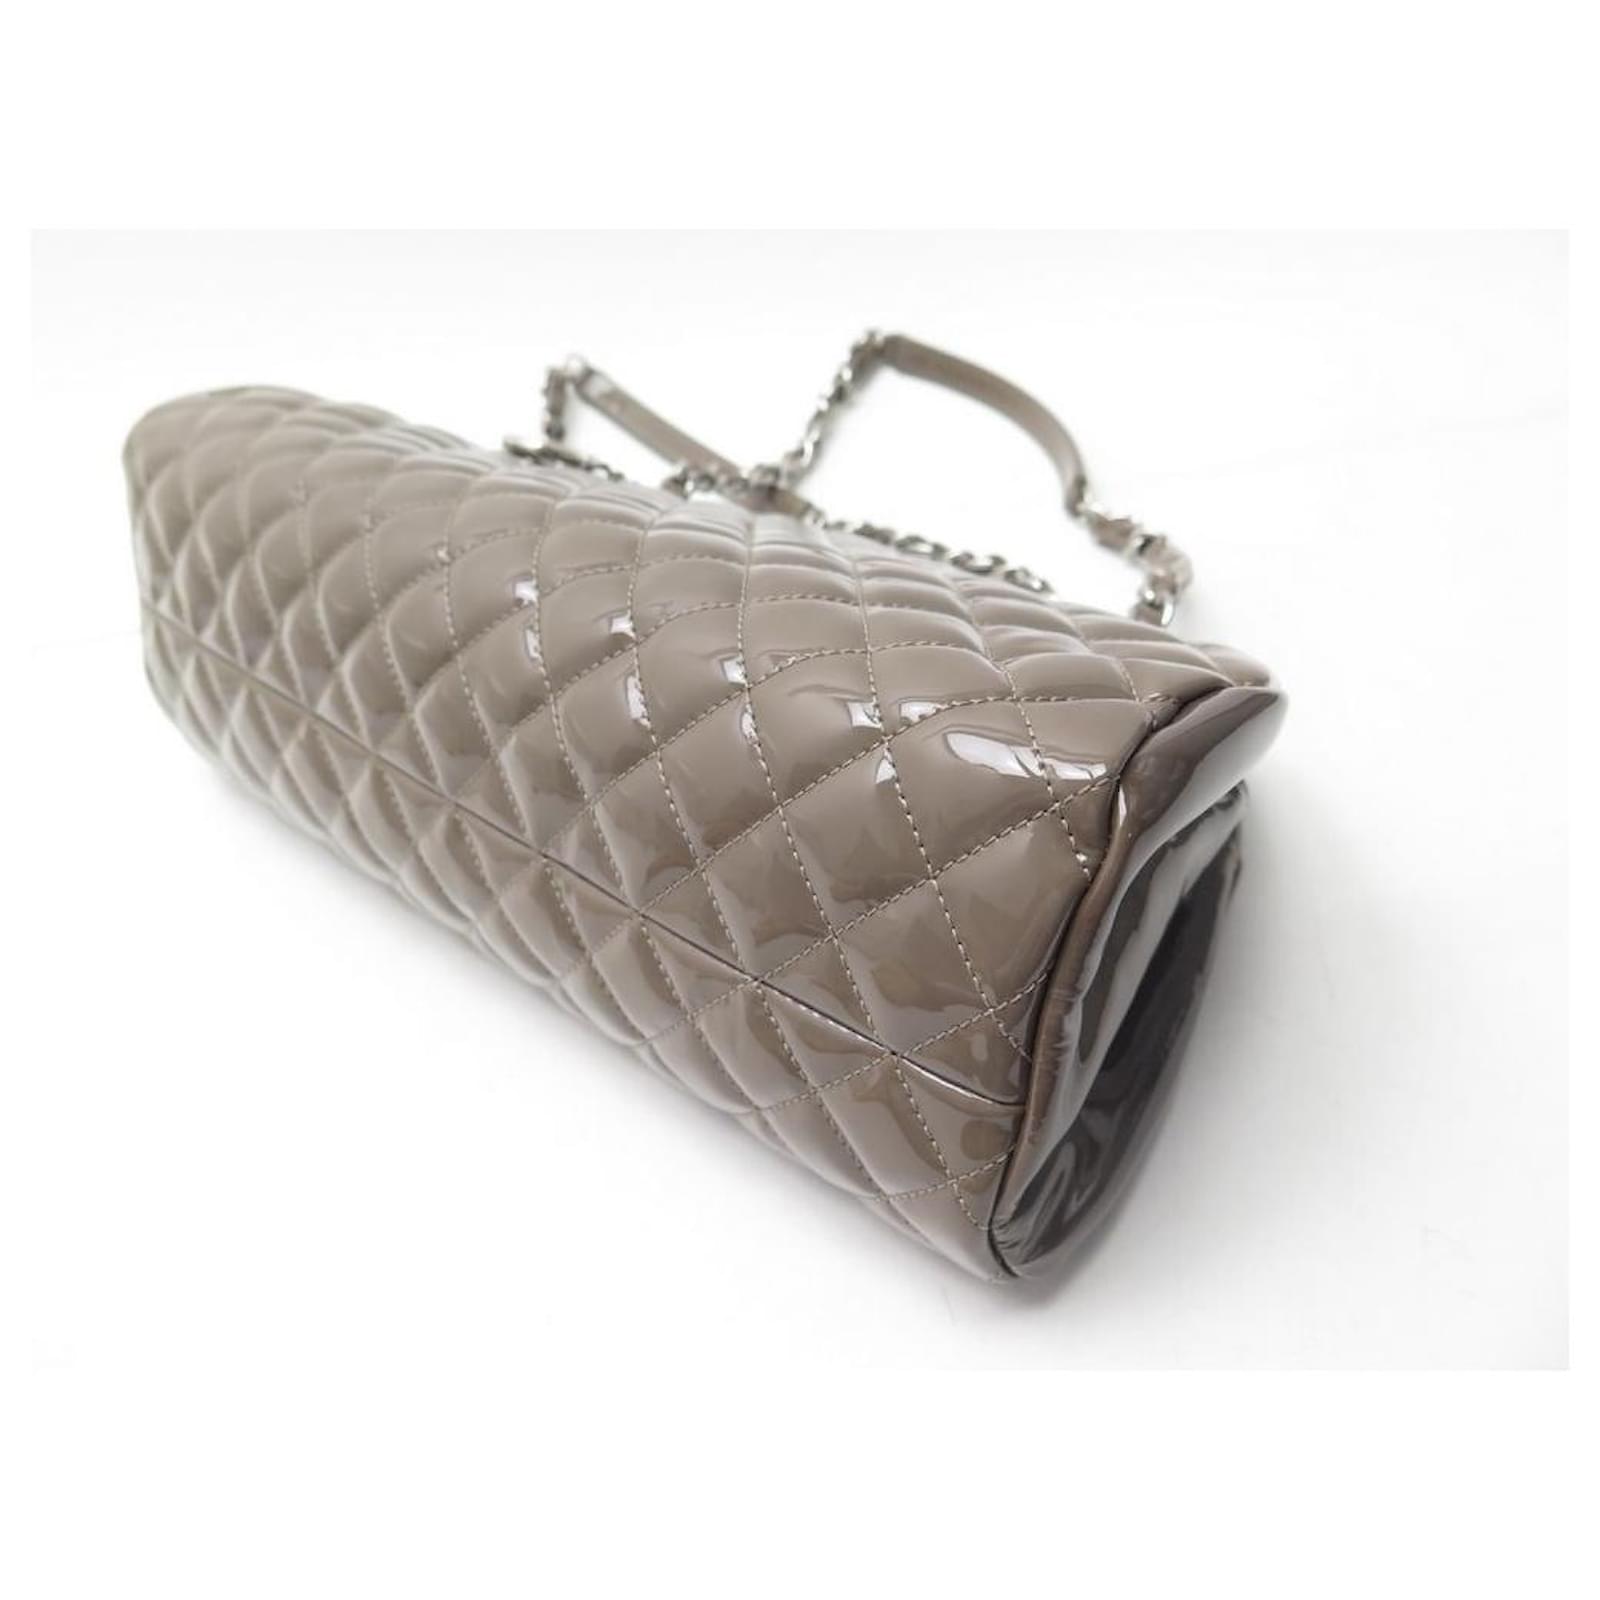 NEW CHANEL BOWLING HANDBAG MADEMOISELLE PATENT LEATHER QUILTED TAUPE ref. 418665 - Joli Closet